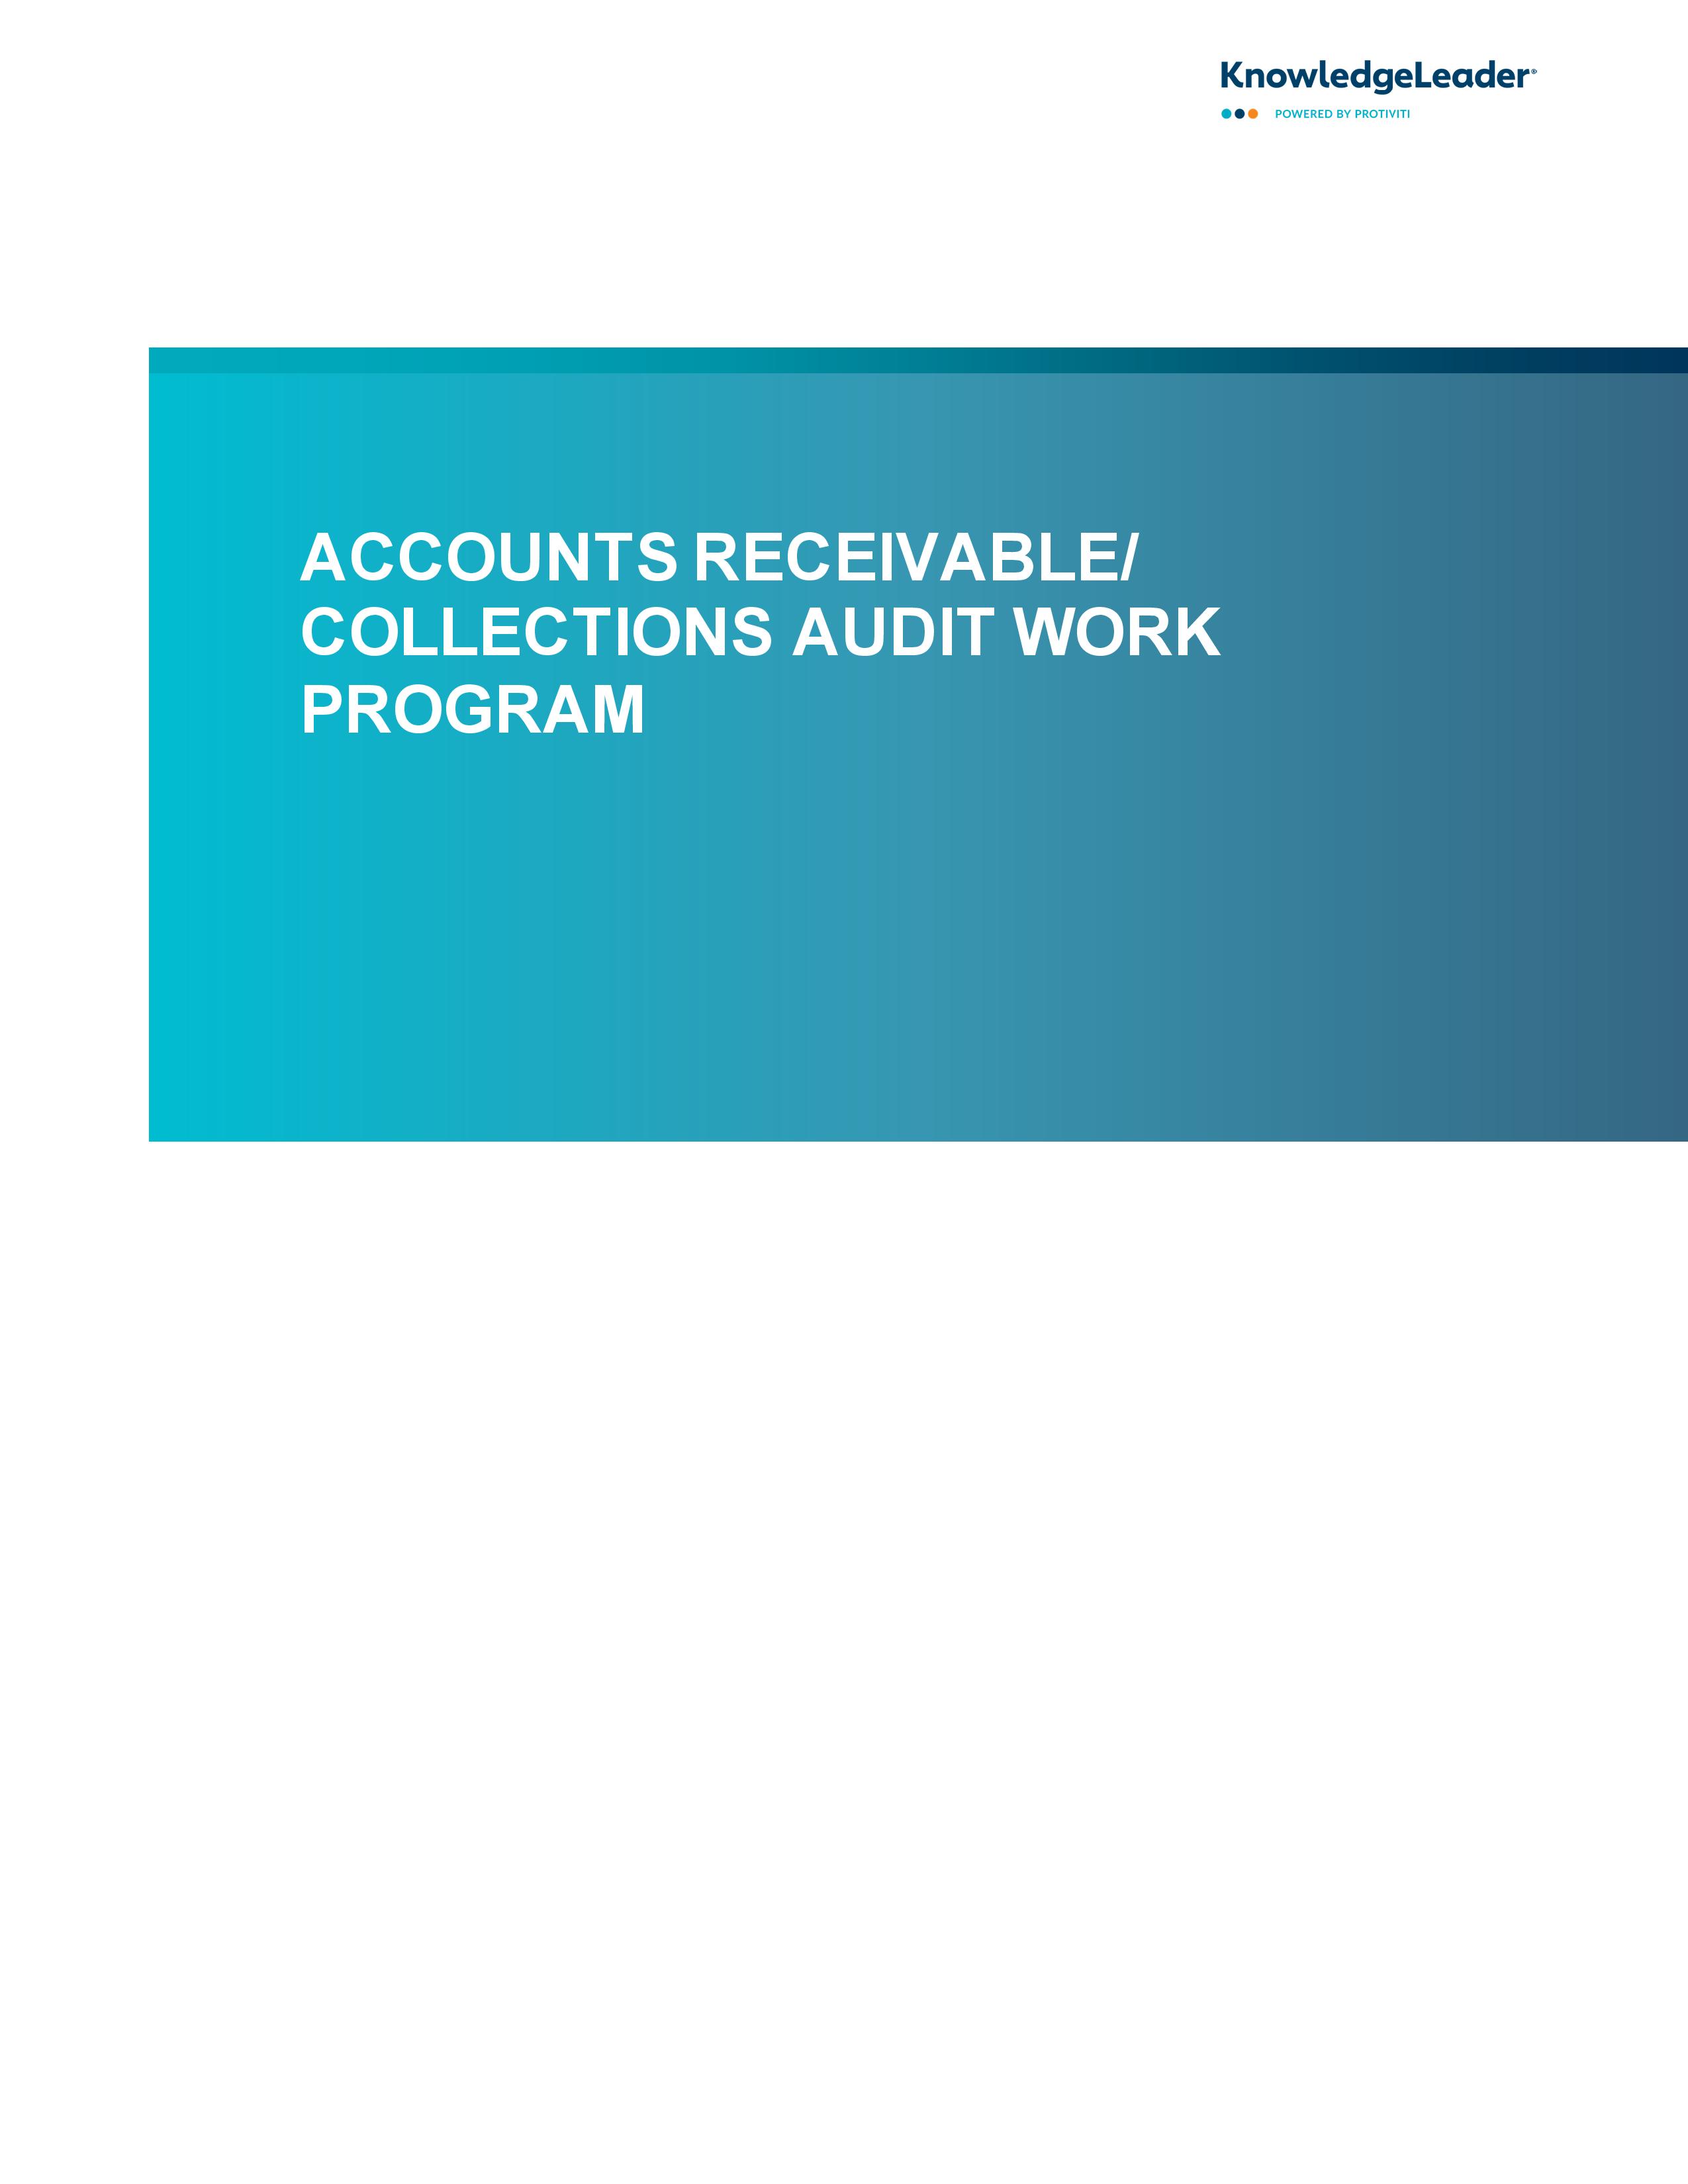 screenshot of the first page of Accounts Receivable Collections Audit Work Program